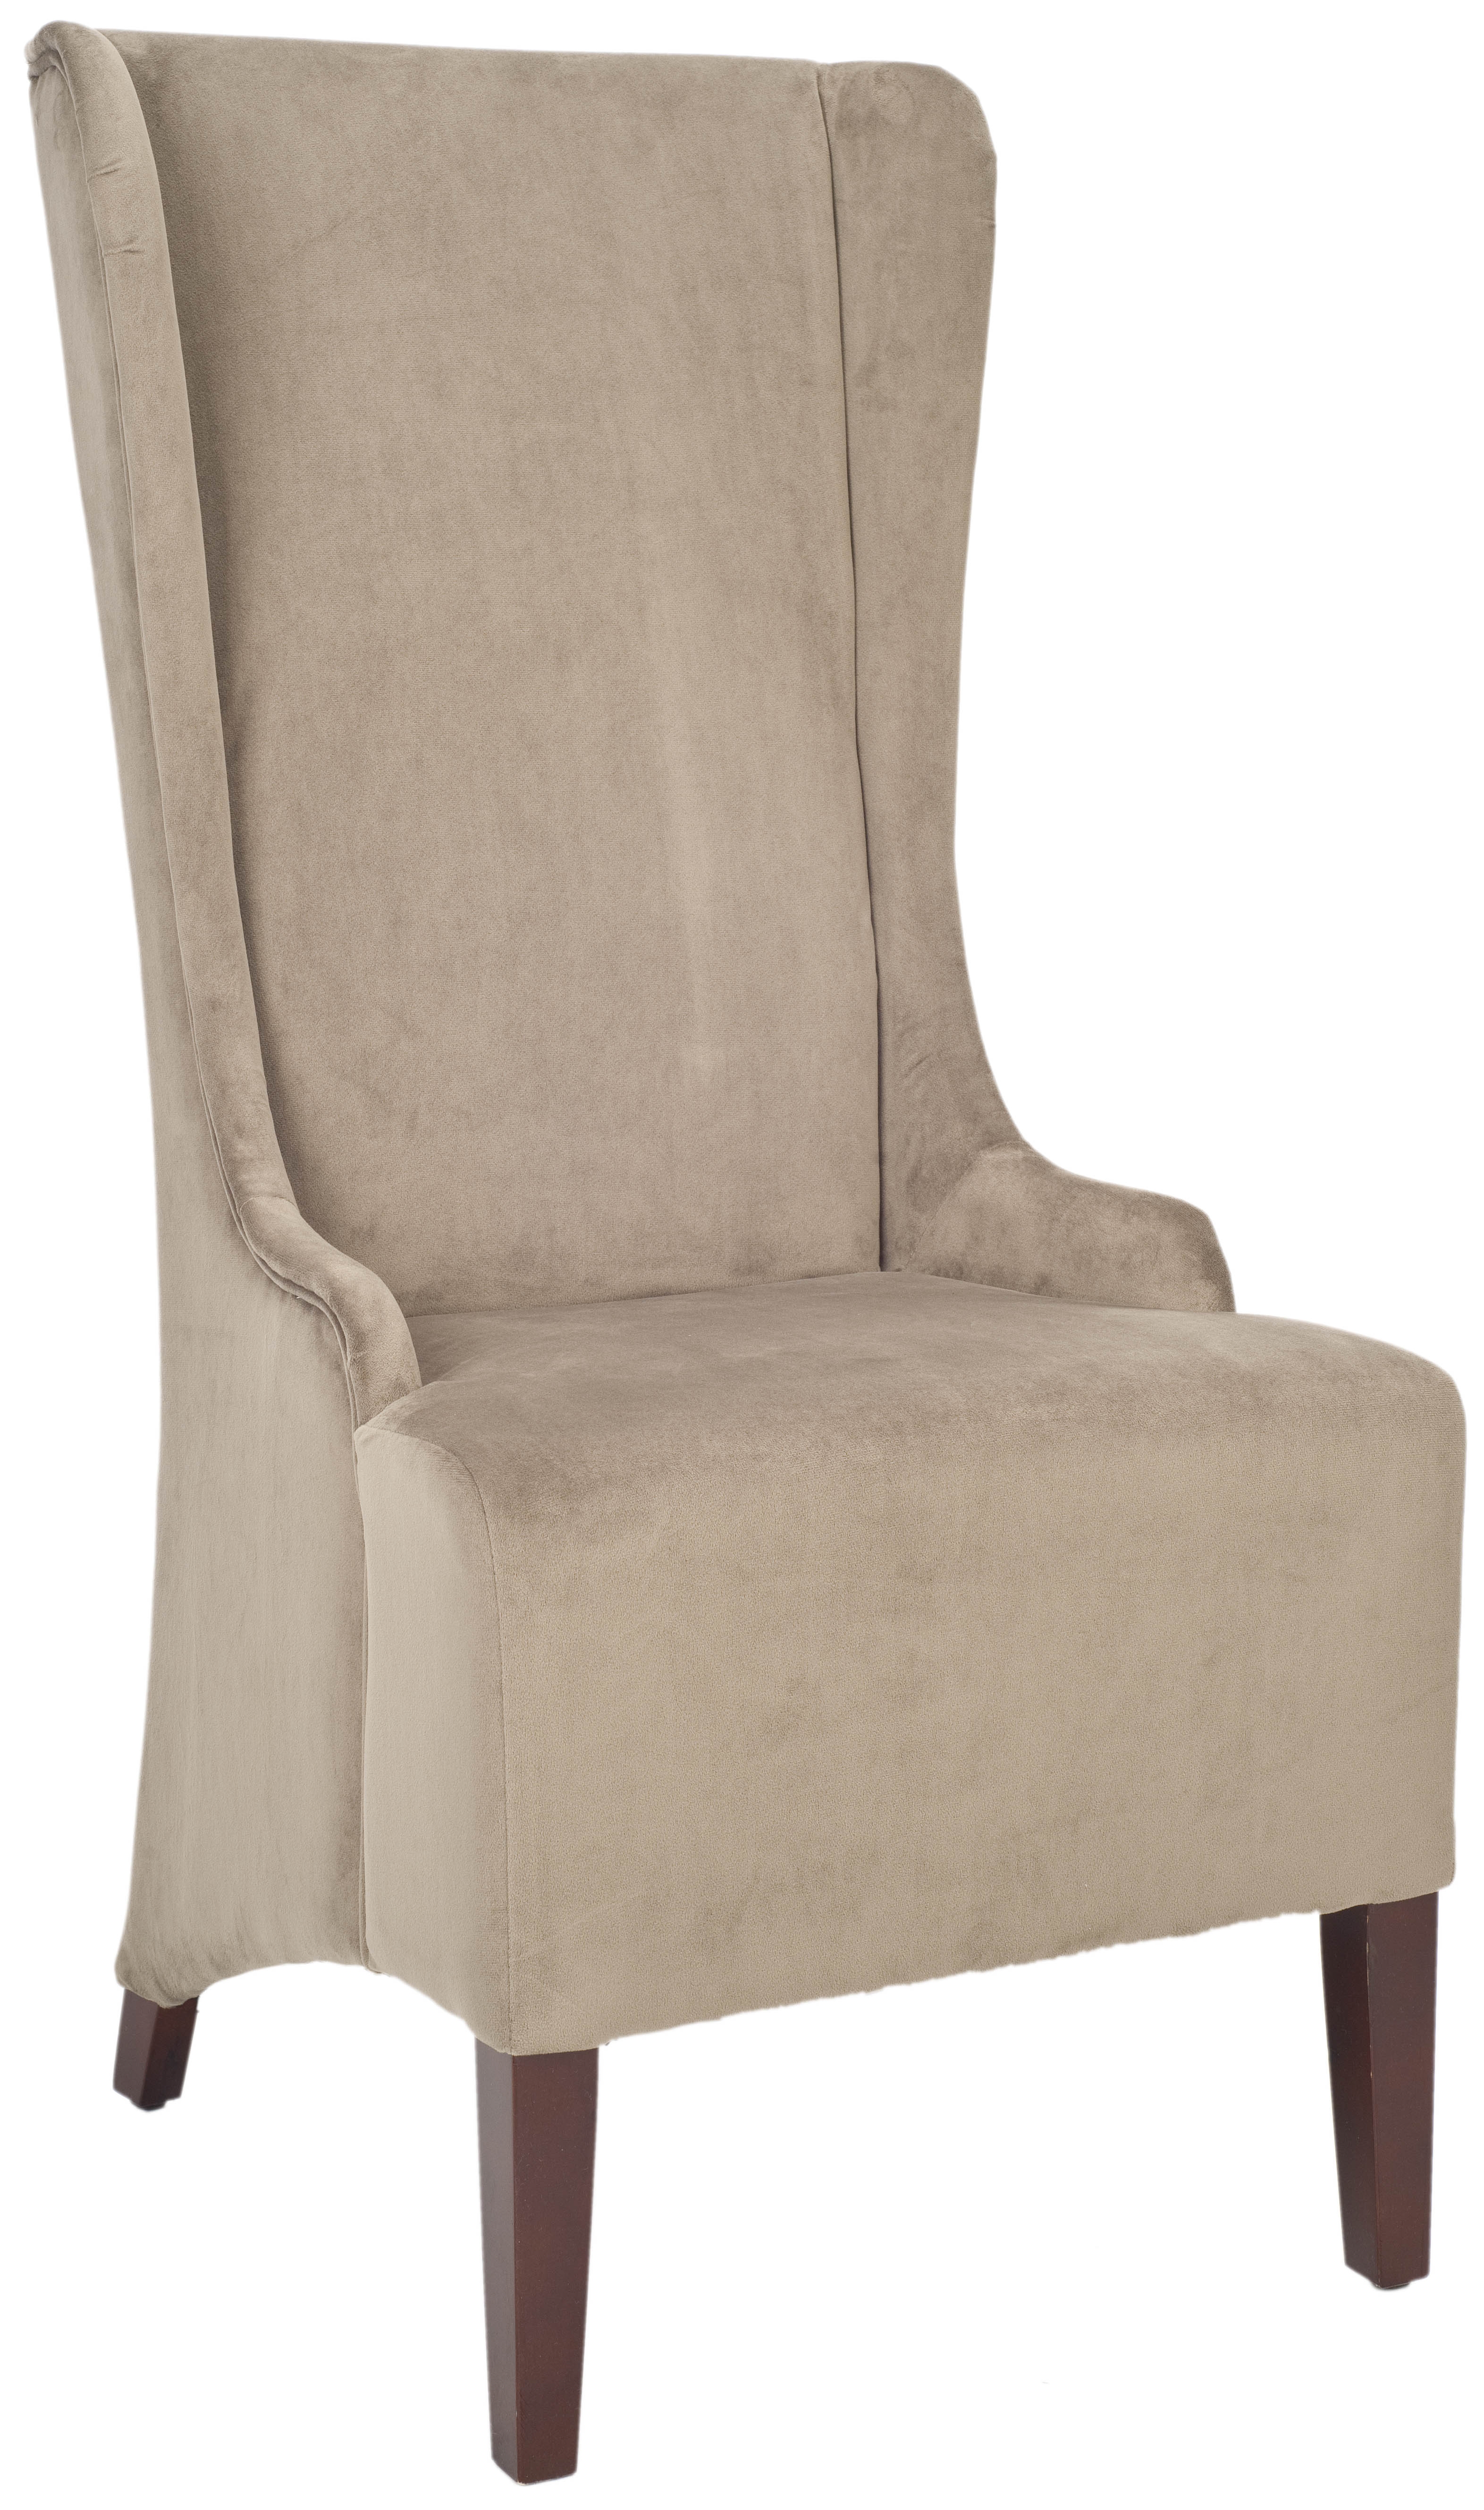 Becall 20''H Cotton Dining Chair - Mushroom Taupe/Cherry Mahogany - Arlo Home - Image 1